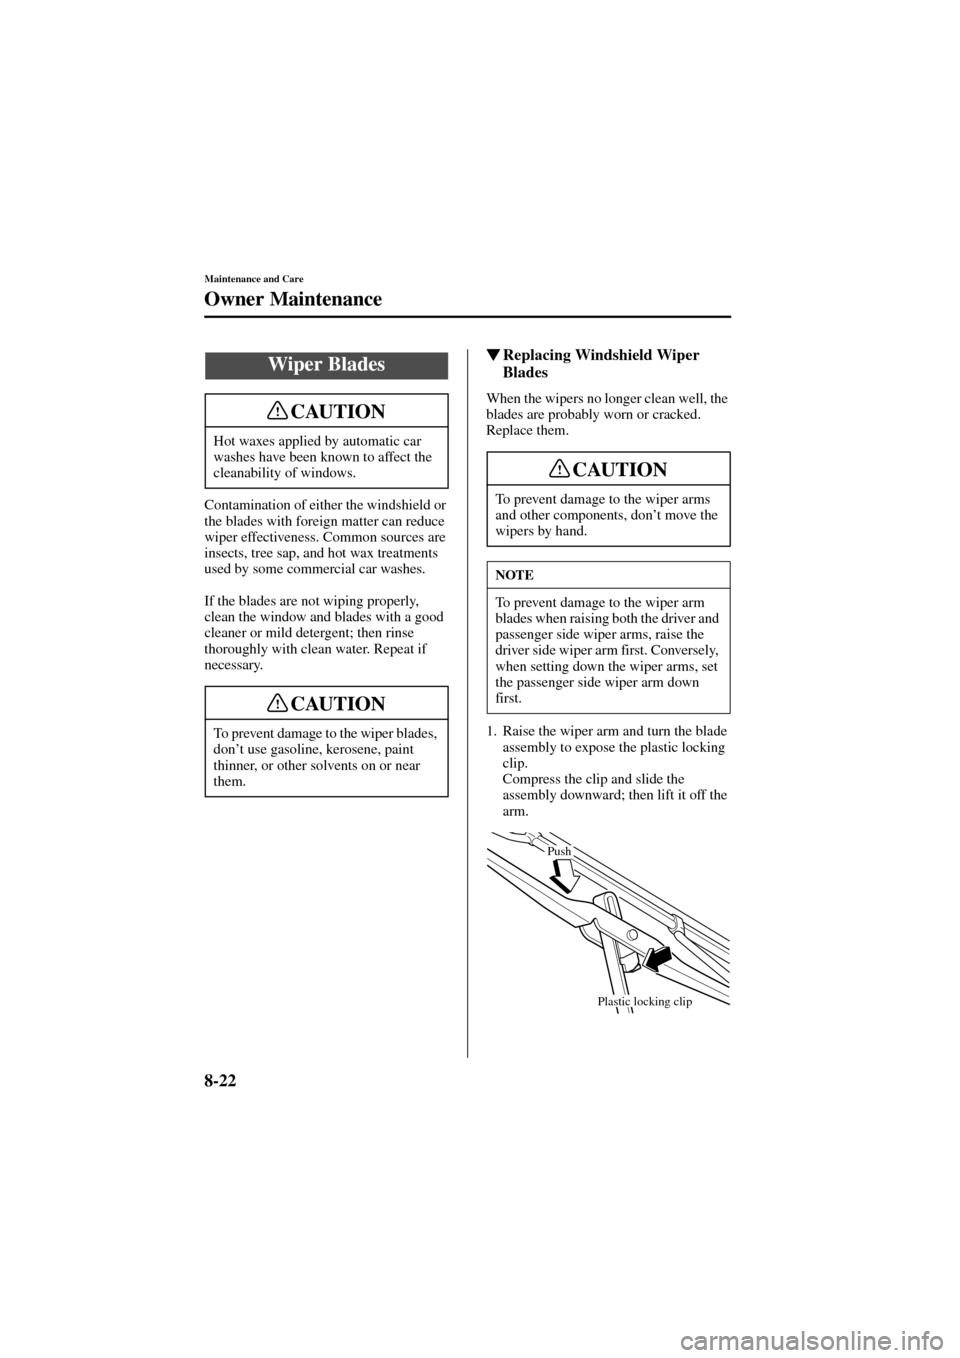 MAZDA MODEL 6 2004  Owners Manual (in English) 8-22
Maintenance and Care
Owner Maintenance
Form No. 8R29-EA-02I
Contamination of either the windshield or 
the blades with foreign matter can reduce 
wiper effectiveness. Common sources are 
insects,